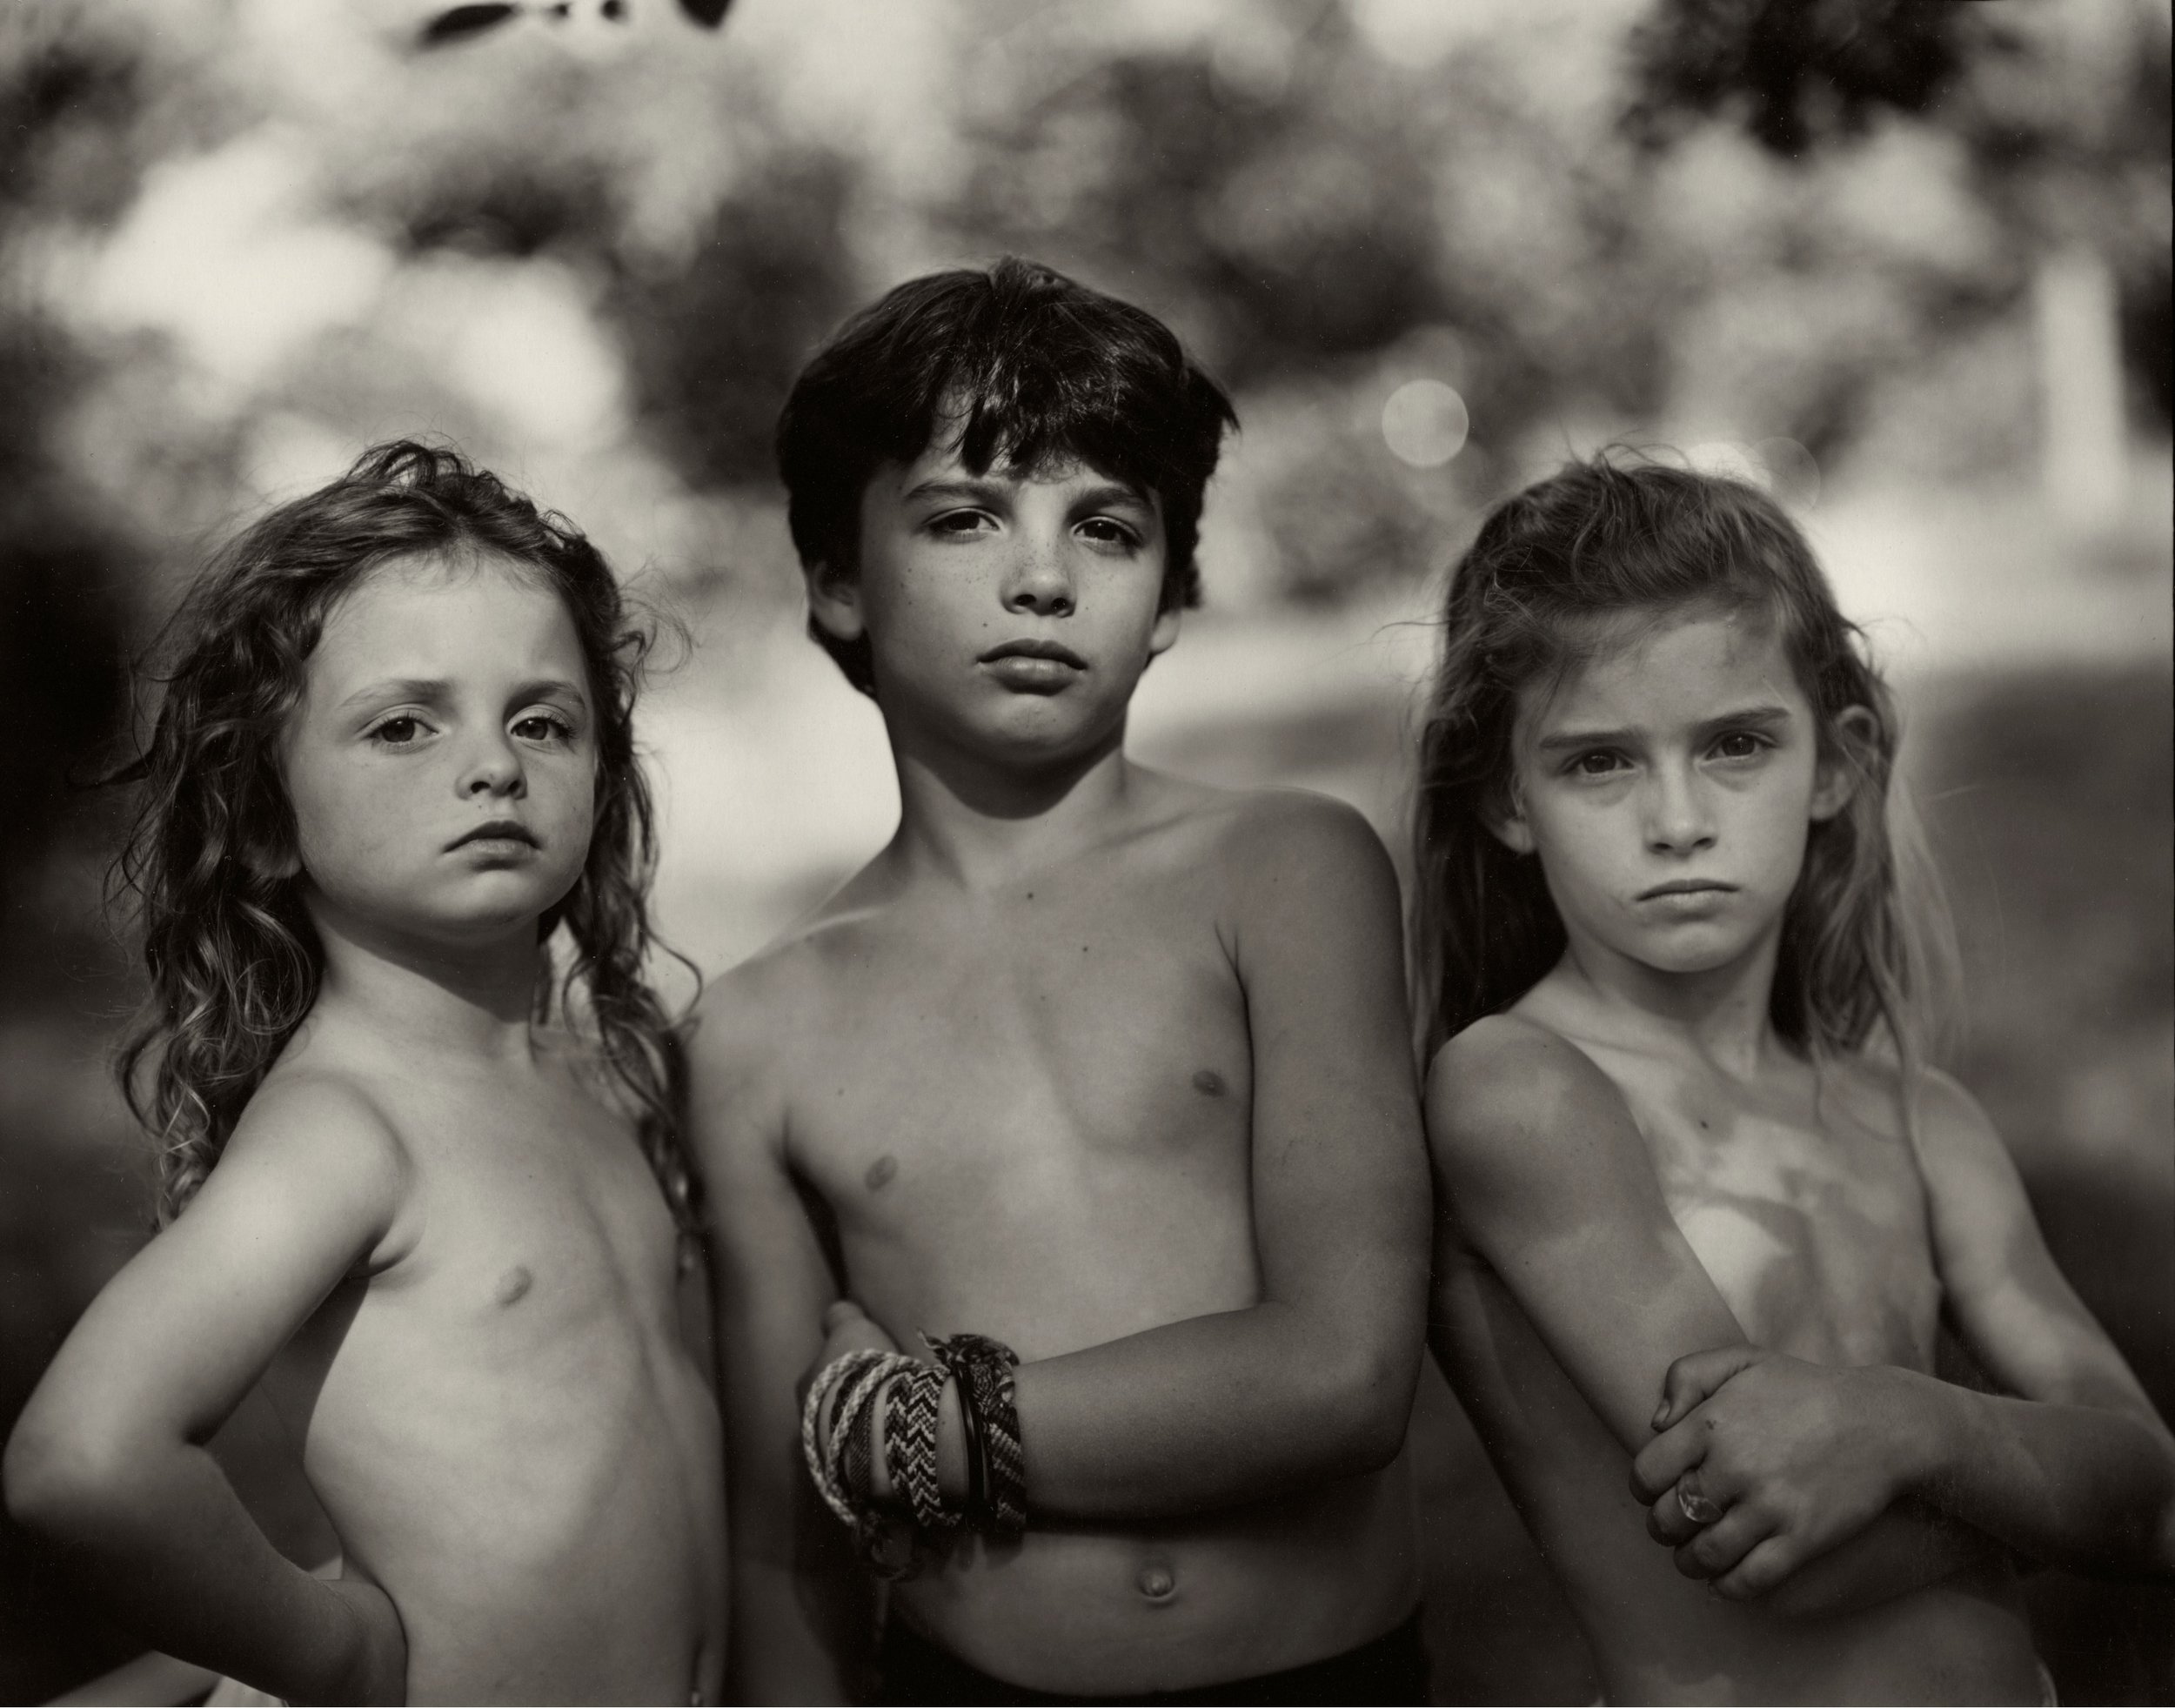  Sally Mann (United States, born 1951),  Emmett, Jessie, and Virginia , 1989, gelatin silver print, 18 3/4 x 23 inches. Promised Gift from the Judy Glickman Lauder Collection, 4.2012. © Sally Mann. Courtesy Gagosian 